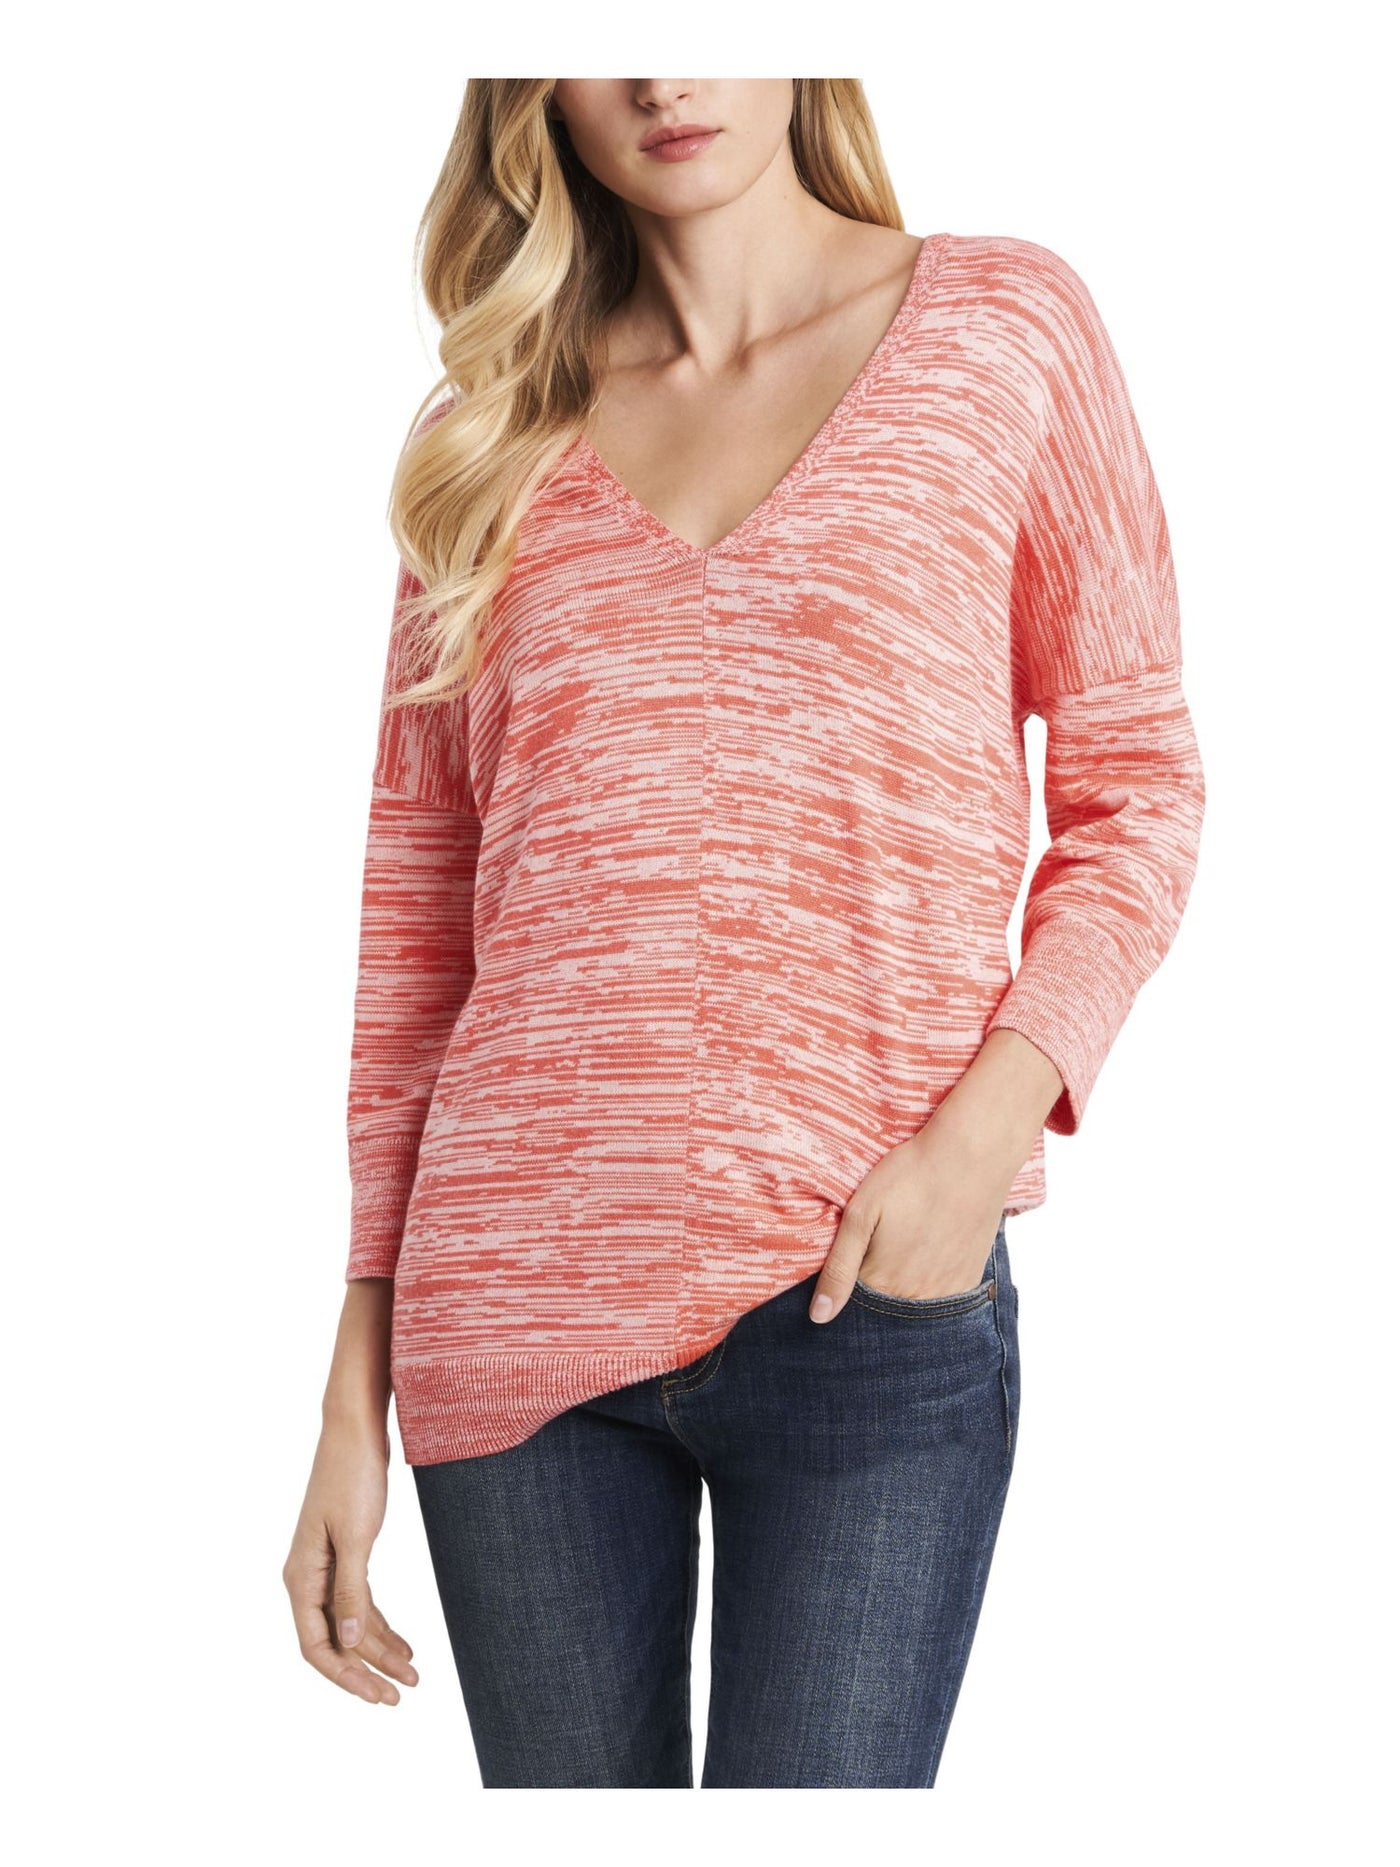 VINCE CAMUTO Womens Coral Dolman 3/4 Sleeve V Neck Top XXS